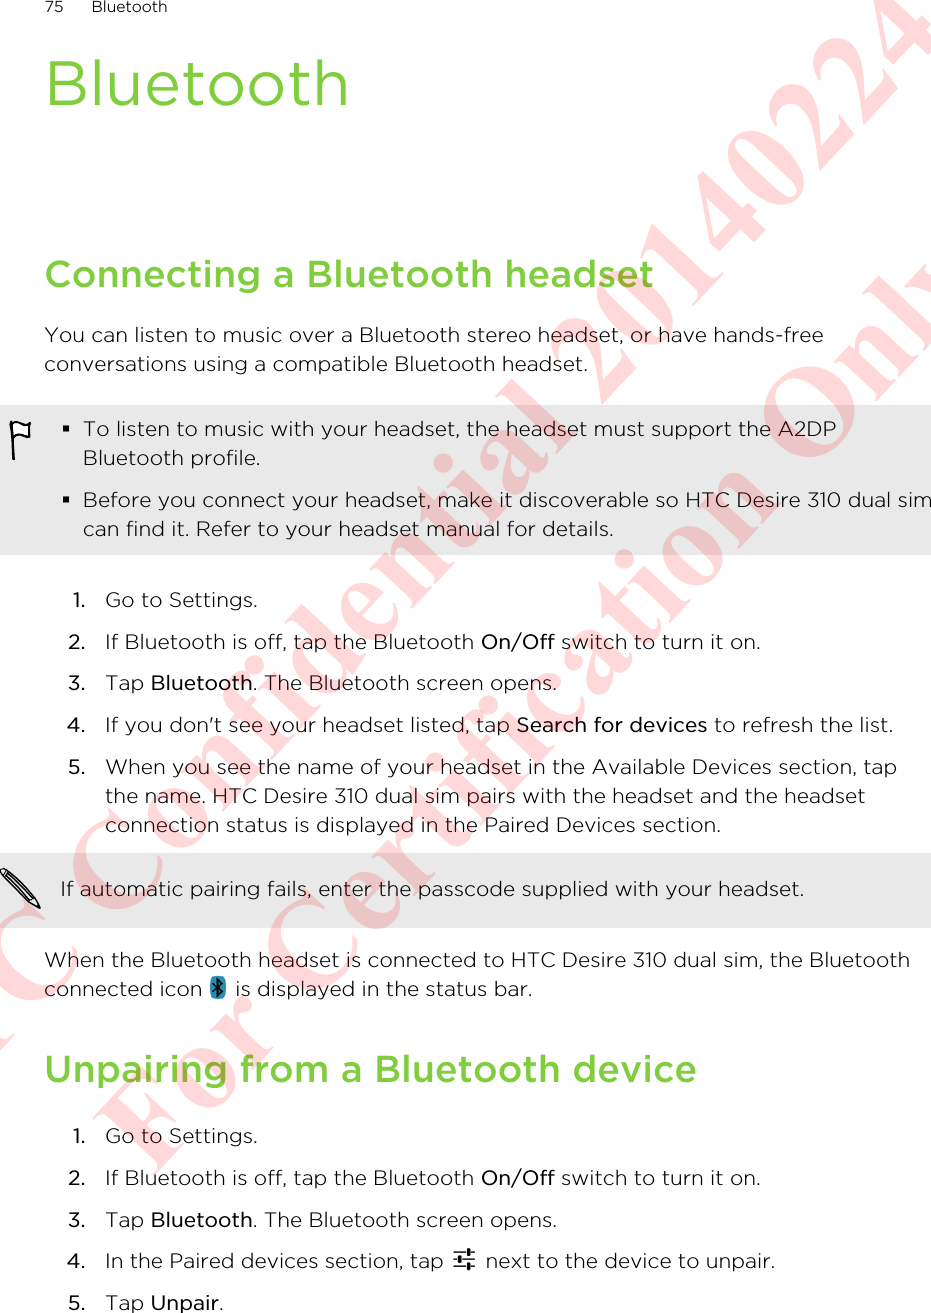 BluetoothConnecting a Bluetooth headsetYou can listen to music over a Bluetooth stereo headset, or have hands-freeconversations using a compatible Bluetooth headset.§To listen to music with your headset, the headset must support the A2DPBluetooth profile.§Before you connect your headset, make it discoverable so HTC Desire 310 dual simcan find it. Refer to your headset manual for details.1. Go to Settings.2. If Bluetooth is off, tap the Bluetooth On/Off switch to turn it on.3. Tap Bluetooth. The Bluetooth screen opens.4. If you don&apos;t see your headset listed, tap Search for devices to refresh the list.5. When you see the name of your headset in the Available Devices section, tapthe name. HTC Desire 310 dual sim pairs with the headset and the headsetconnection status is displayed in the Paired Devices section.If automatic pairing fails, enter the passcode supplied with your headset.When the Bluetooth headset is connected to HTC Desire 310 dual sim, the Bluetoothconnected icon   is displayed in the status bar.Unpairing from a Bluetooth device1. Go to Settings.2. If Bluetooth is off, tap the Bluetooth On/Off switch to turn it on.3. Tap Bluetooth. The Bluetooth screen opens.4. In the Paired devices section, tap   next to the device to unpair.5. Tap Unpair.75 BluetoothHTC Confidential 20140224 For Certification Only